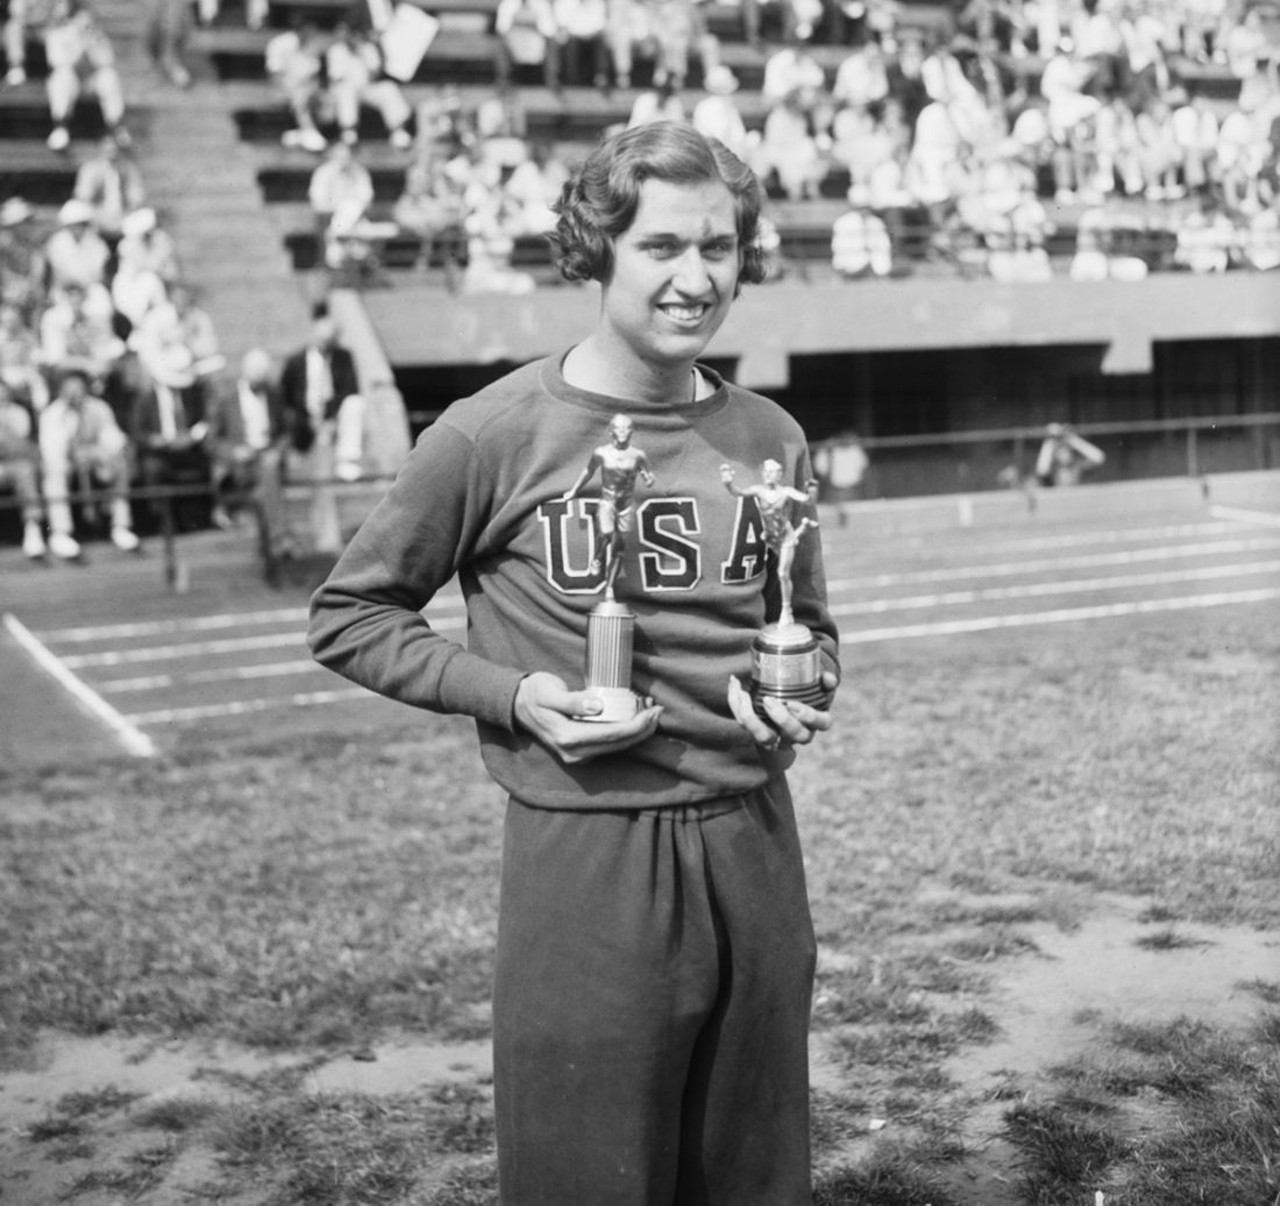 Helen Stephens. Nicknamed the &#147;Fulton Flash&#148; after her birthplace of Fulton, Missouri, Stephens was a noted athlete in sprint events. She garnered two Olympic gold medals at the 1936 Olympics held in Germany. Her time of 11.5 seconds was below the world record but was not recognized because a strong tailwind was present at the time of the race. During the 1936 Olympics, it was suggested that Stephens and her 100-meter rival, Stanis?awa Walasiewicz of Poland, who had both X0 and XY chromosomes, were in fact male. The Olympic Committee performed a physical check on Stephens and concluded that she was a woman. Stephens retired from athletics shortly after and played professional baseball and softball. From 1938 to 1952, she was the owner and manager of her own semiprofessional basketball team. Later in life, she was employed in the research division of the US Aeronautical Chart and Information Service in St. Louis. (Courtesy of Library of Congress.)